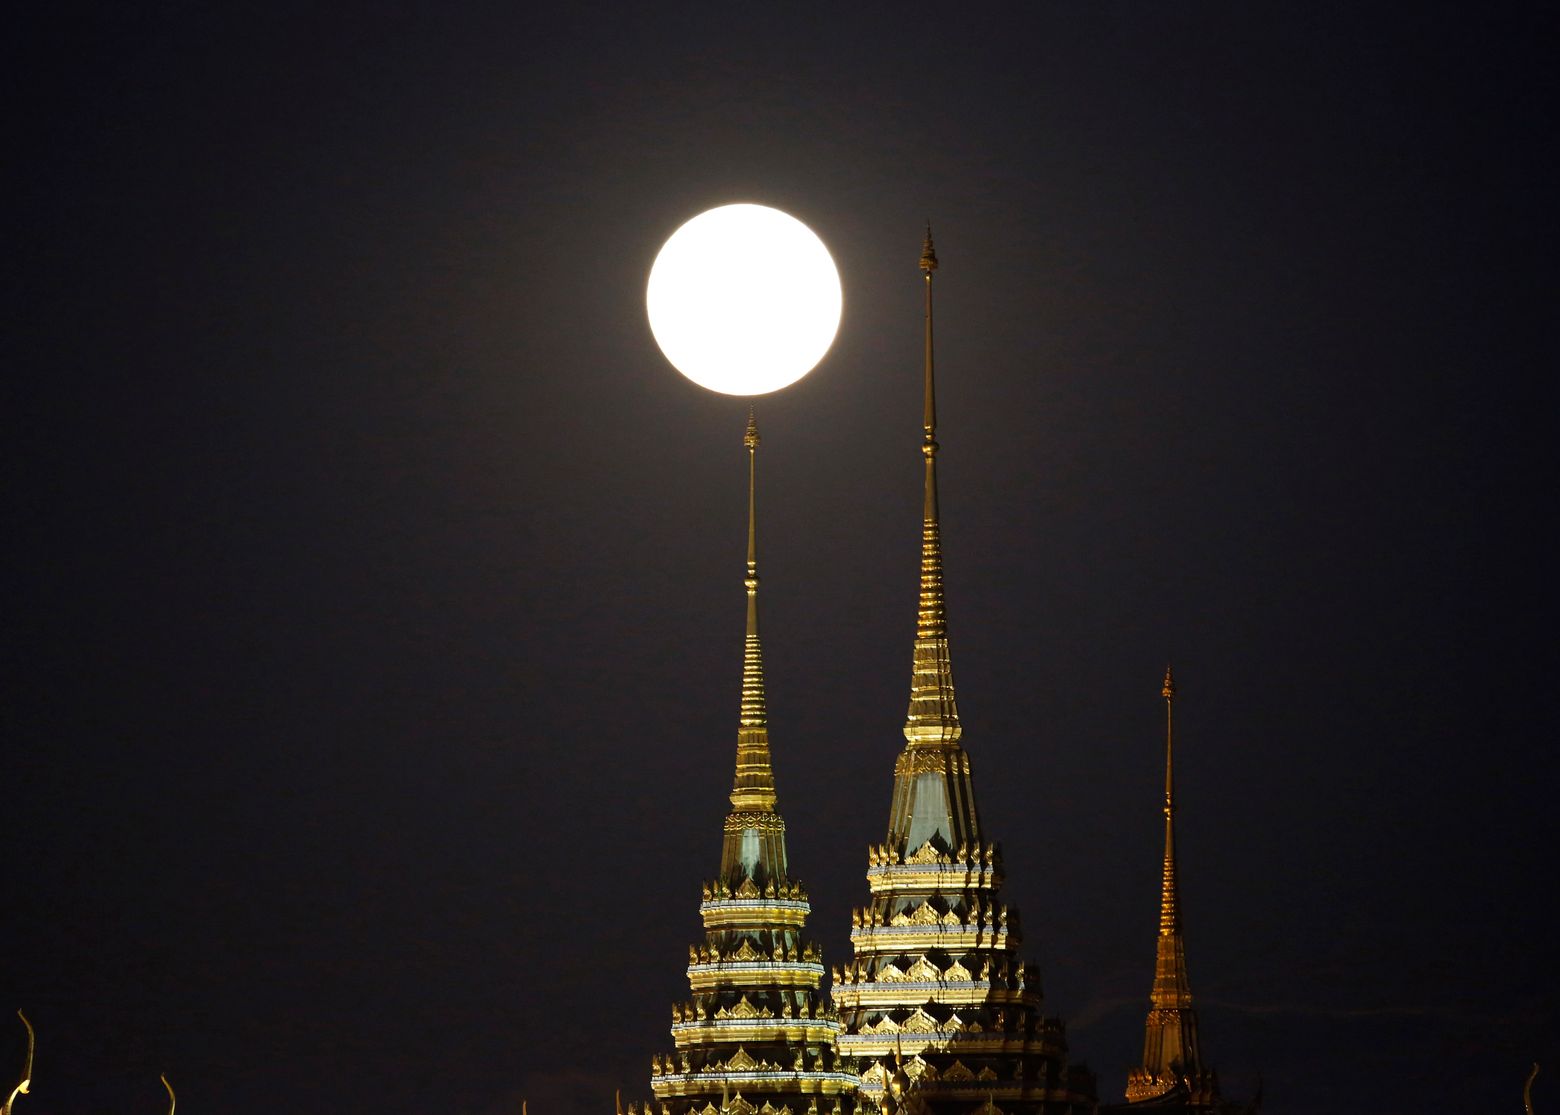 The moon rises over the Grand Palace in Bangkok, Thailand Monday, Nov. 14, 2016. The brightest moon in almost 69 years lights up the sky this week in a treat for star watchers around the globe. (AP Photo/Sakchai Lalit)